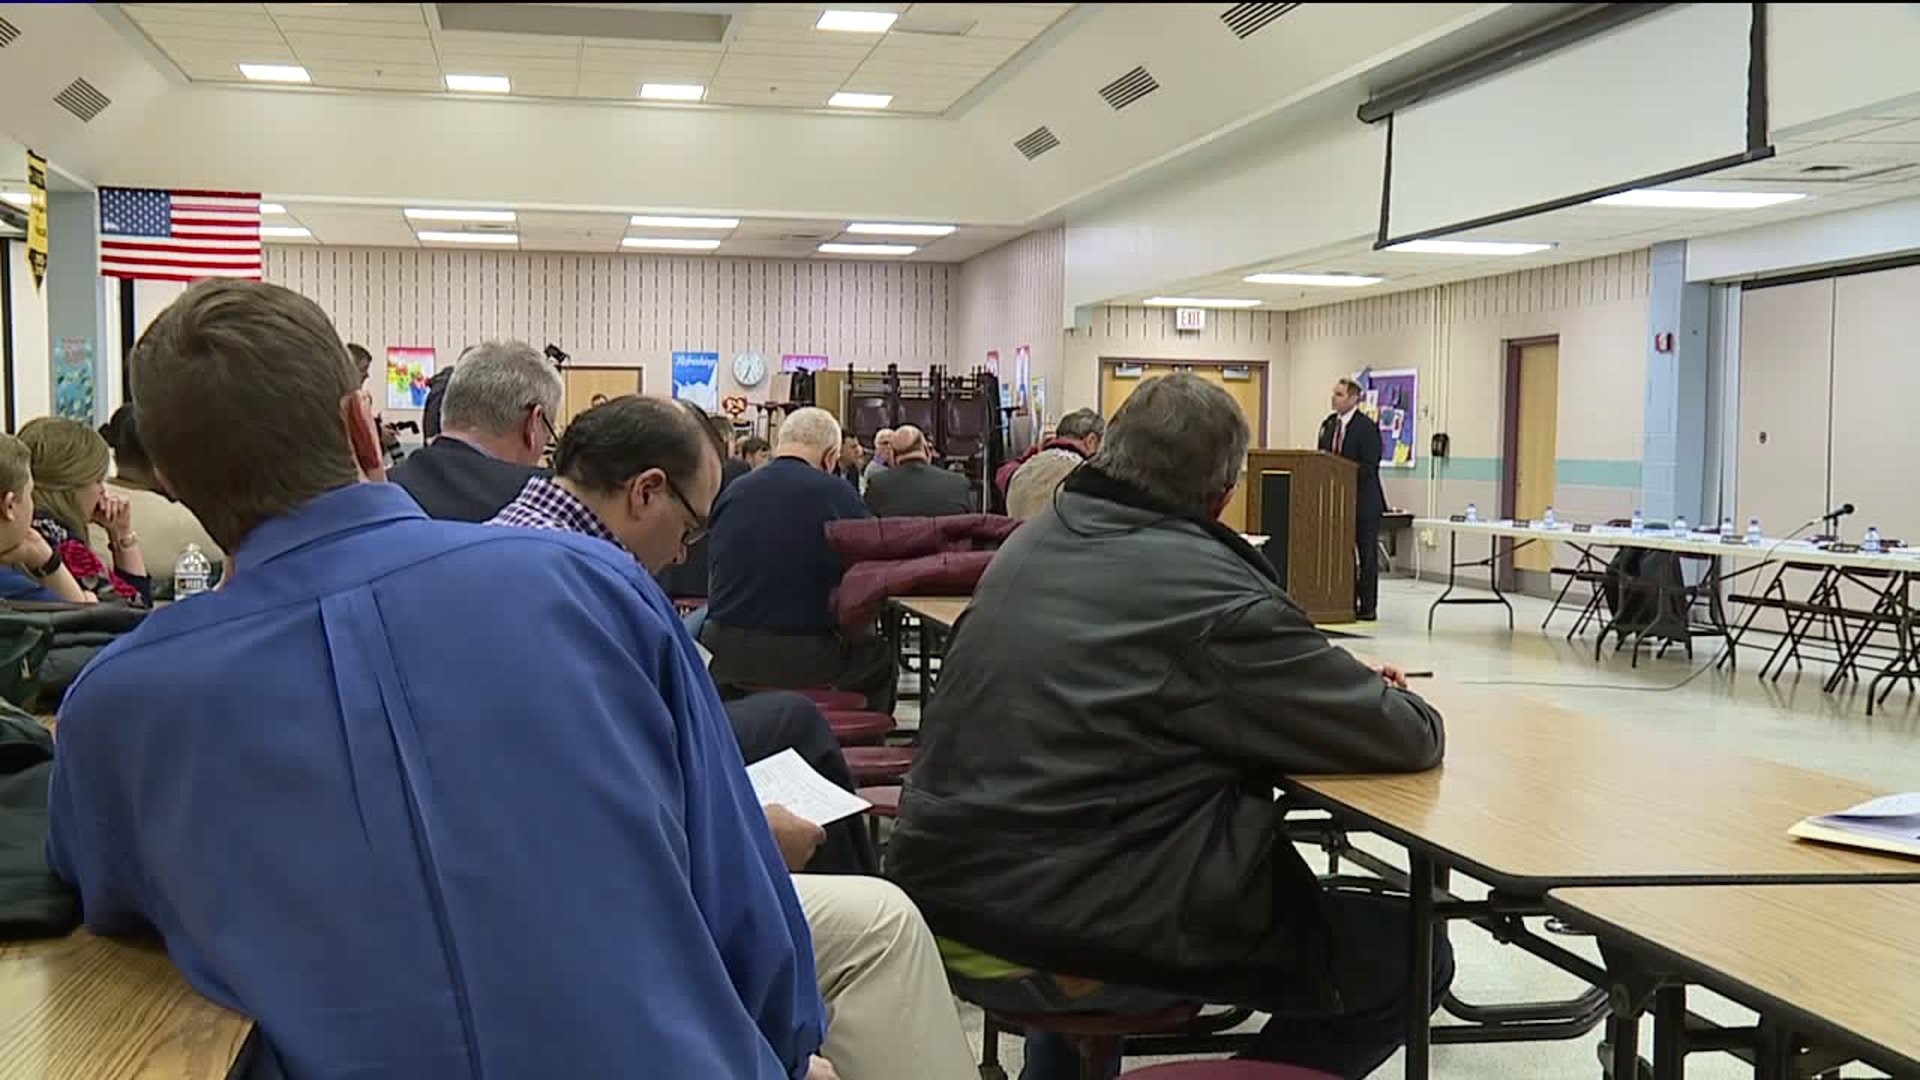 Public Meeting Held to Discuss New Wilkes-Barre Area High School